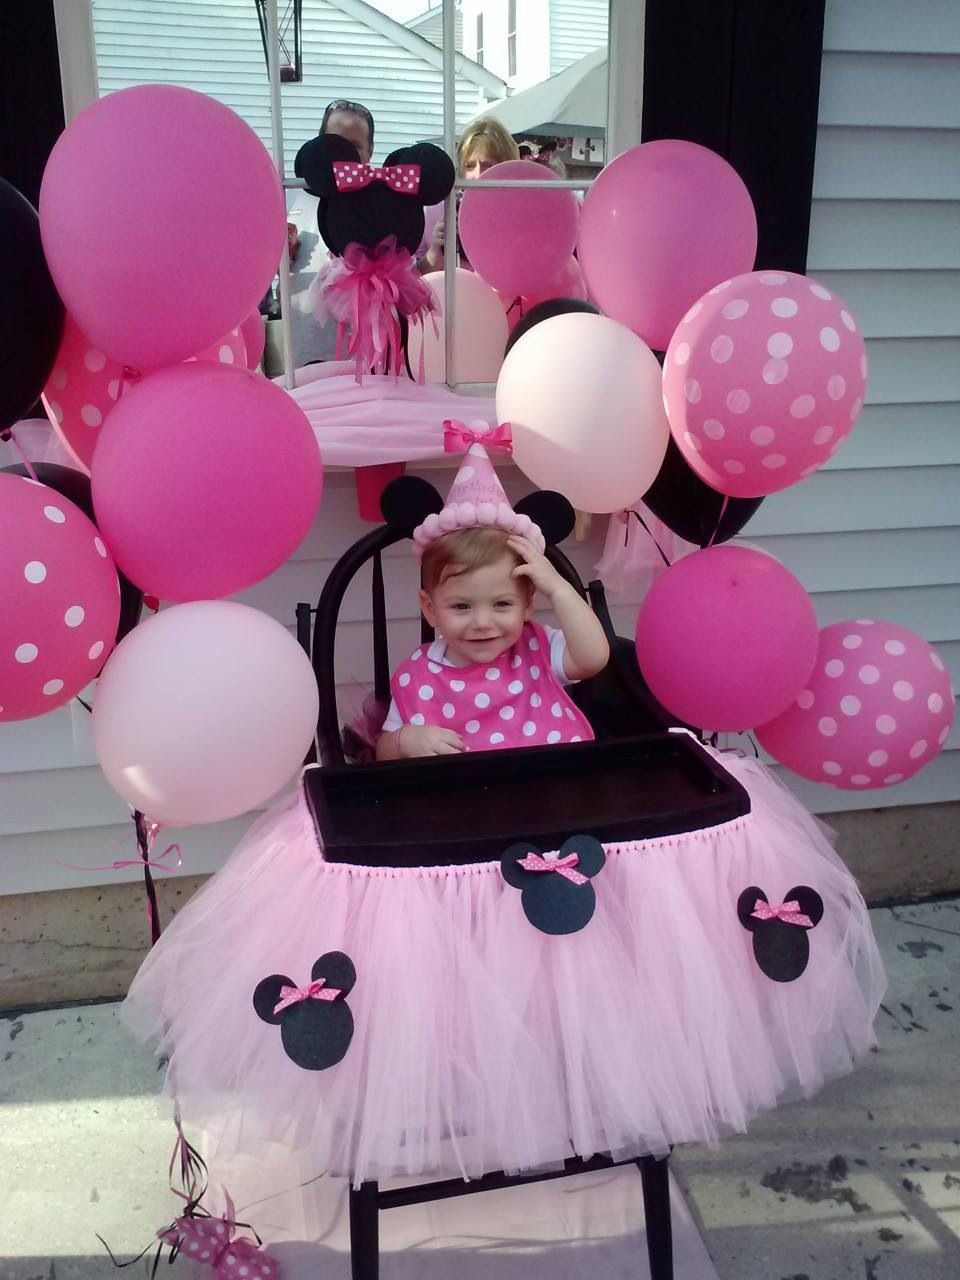 Minnie Mouse 1st Birthday Party Decorations
 Minnie Mouse 1st birthday party Jose Gutierrez